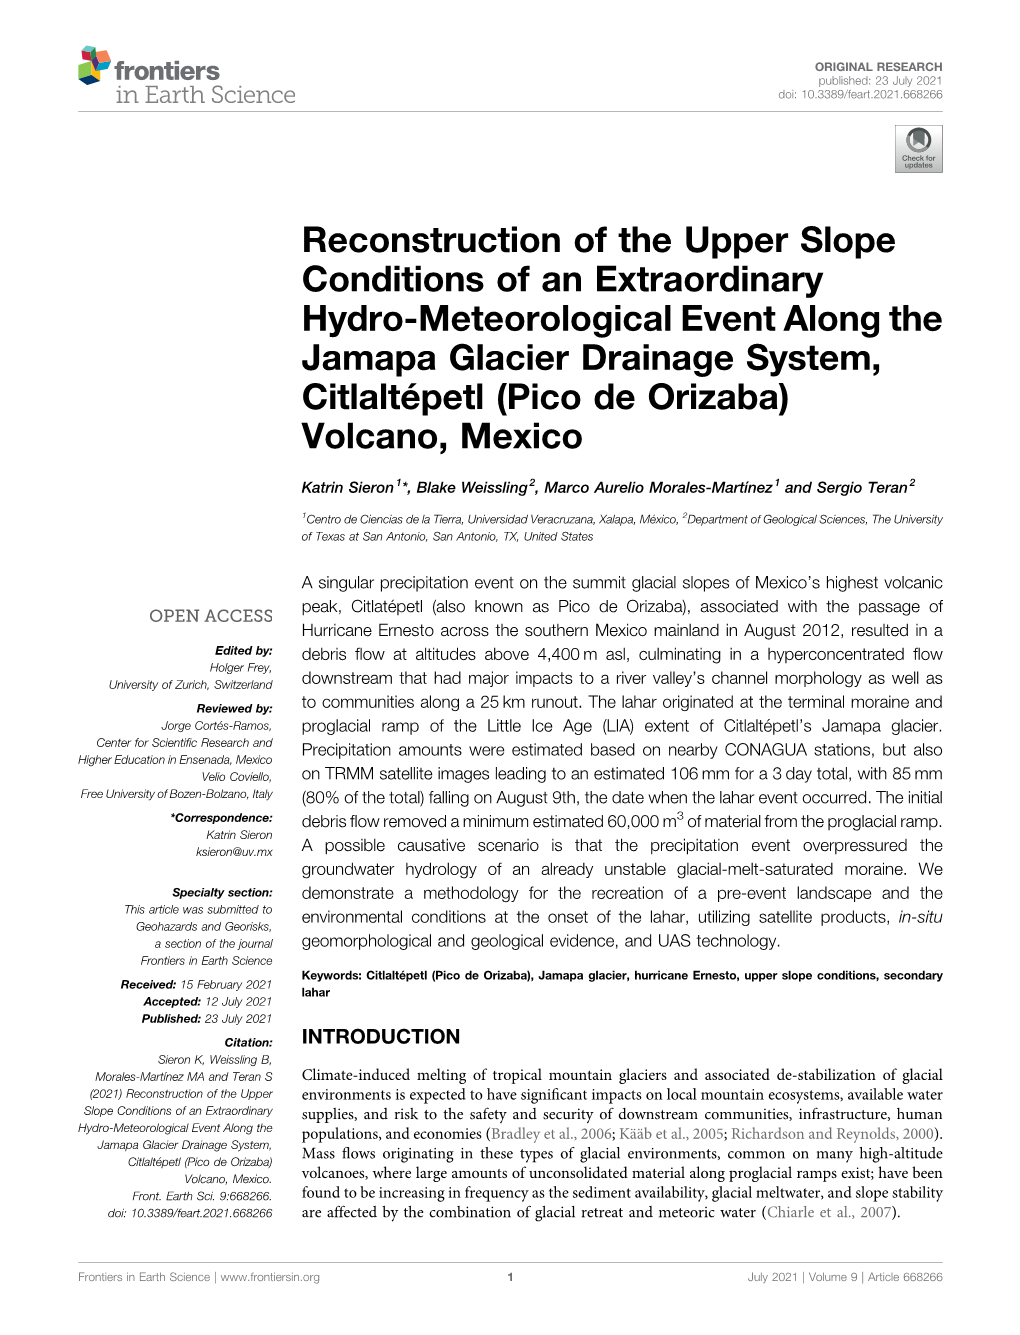 Reconstruction of the Upper Slope Conditions of an Extraordinary Hydro-Meteorological Event Along the Jamapa Glacier Drainage Sy